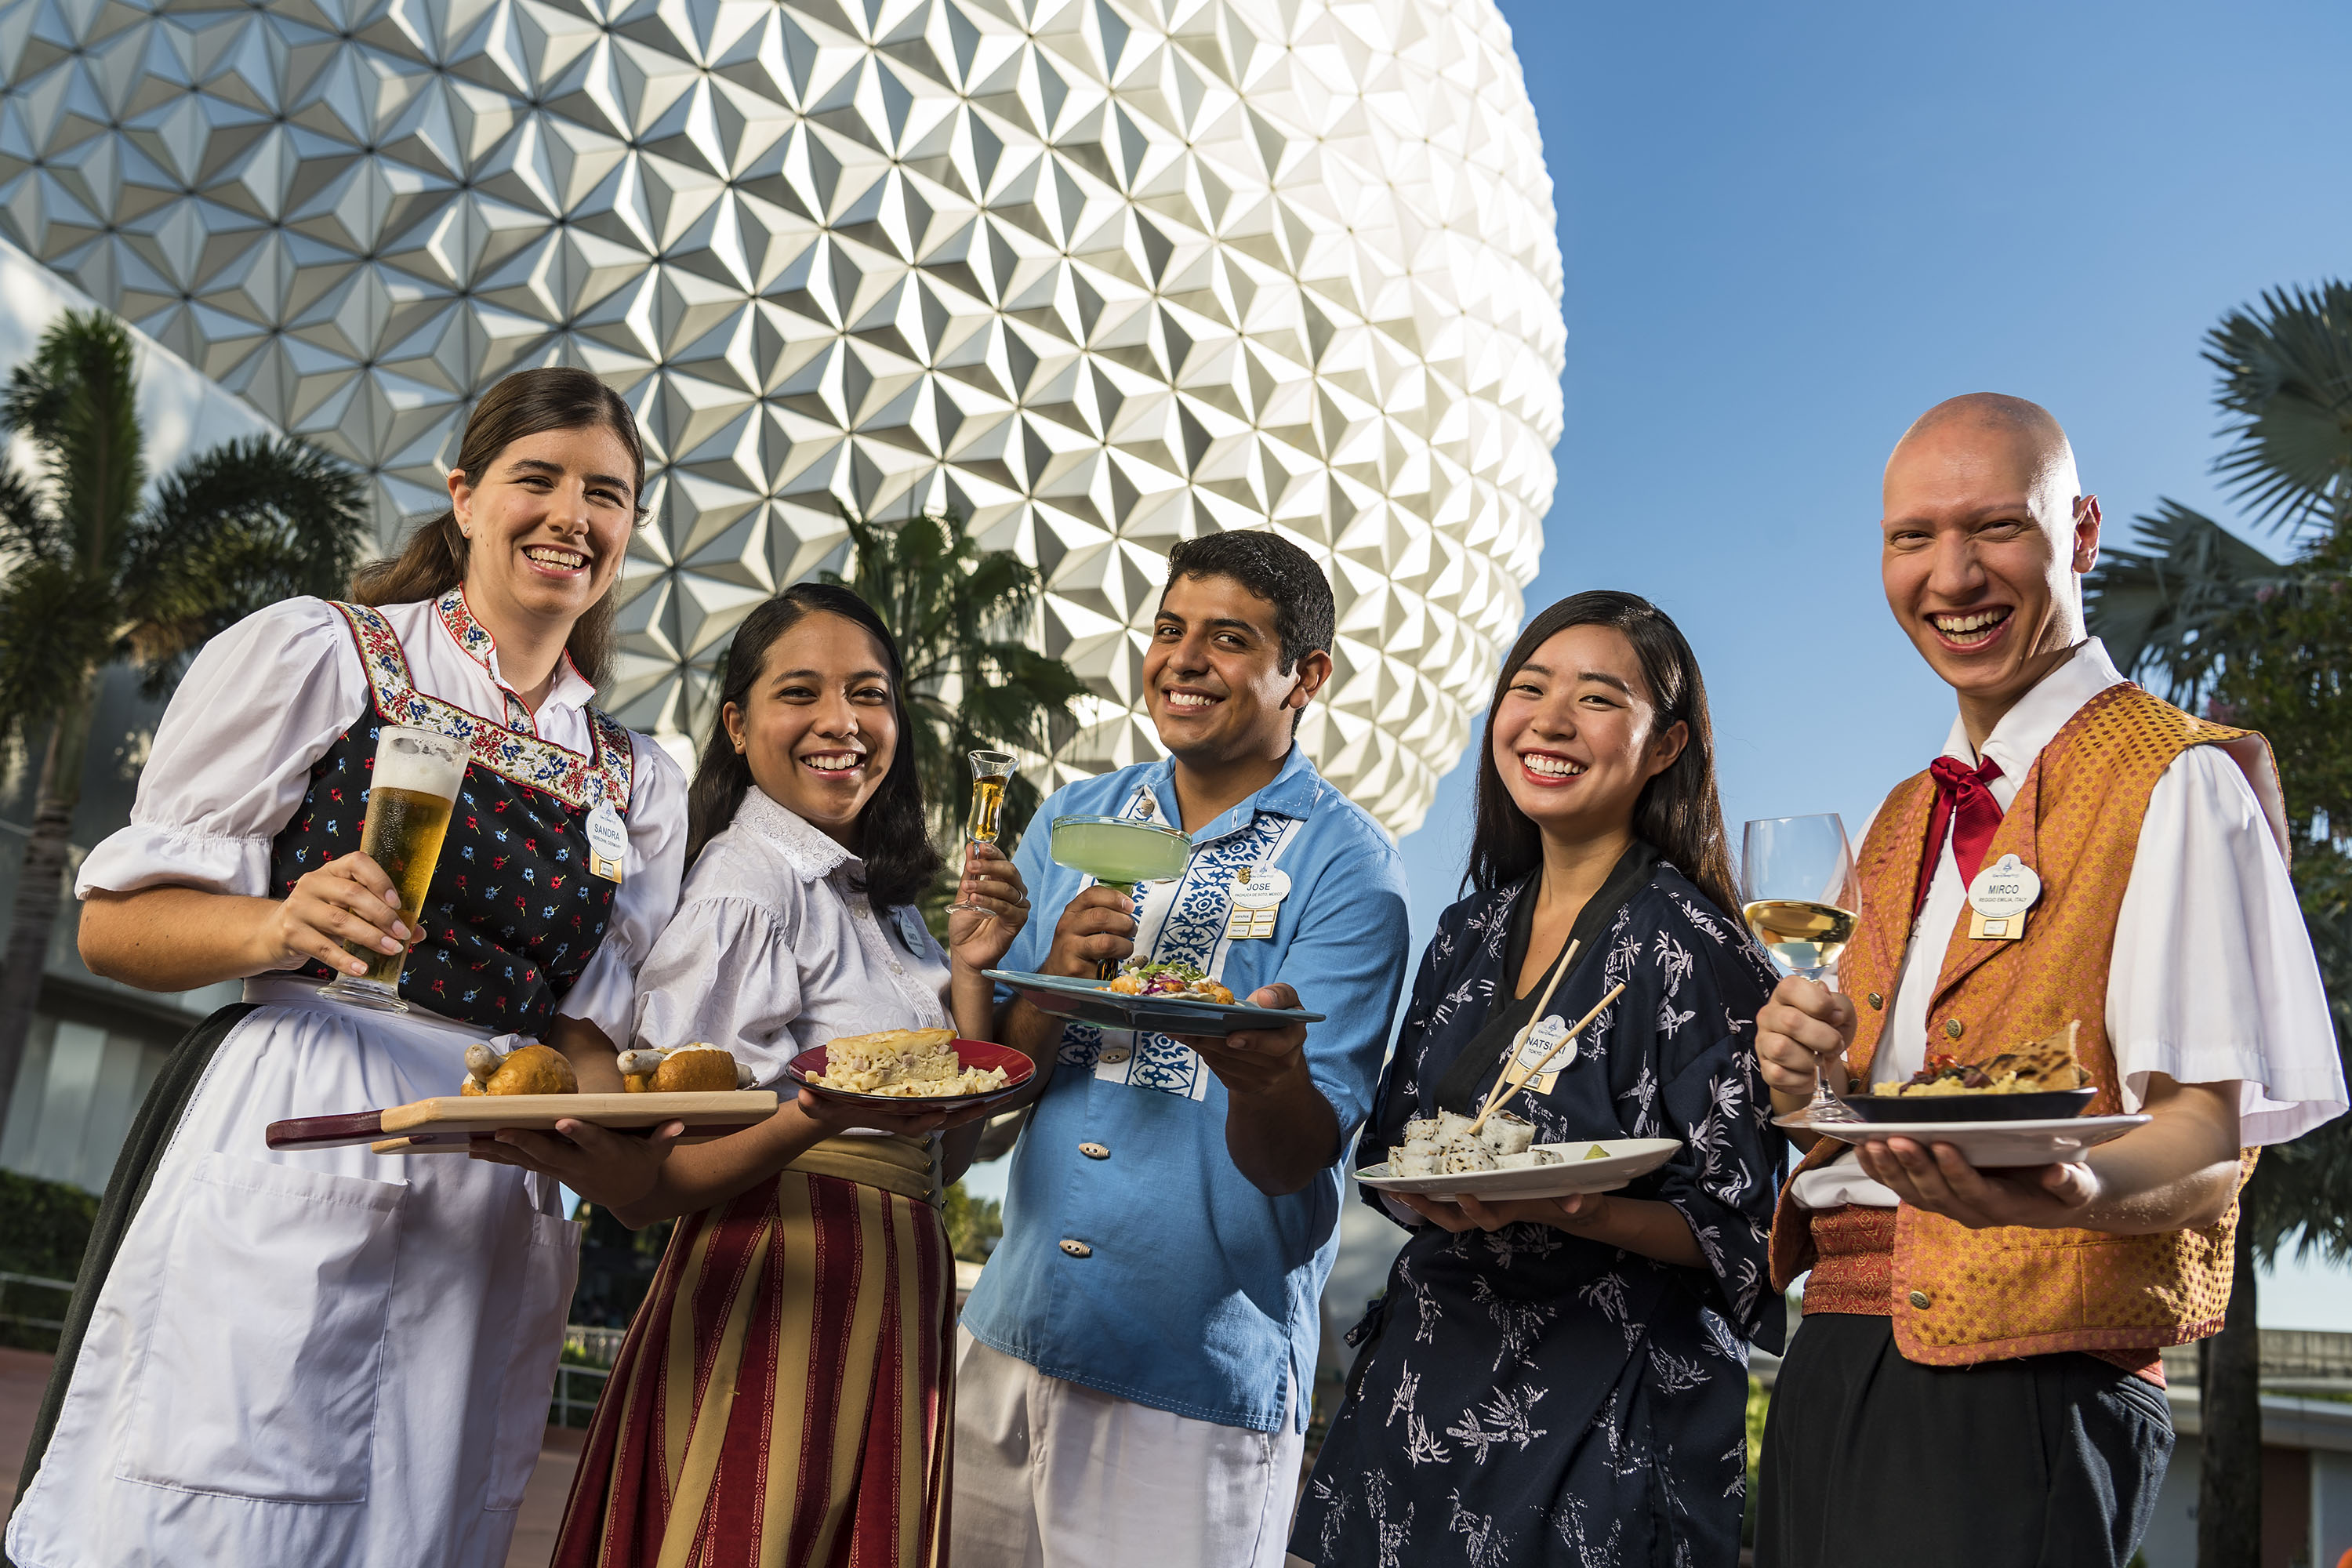 GEEK EATS: Food Guide for the 2018 Epcot International Food & Wine Festival For a Successful Eating Experience!